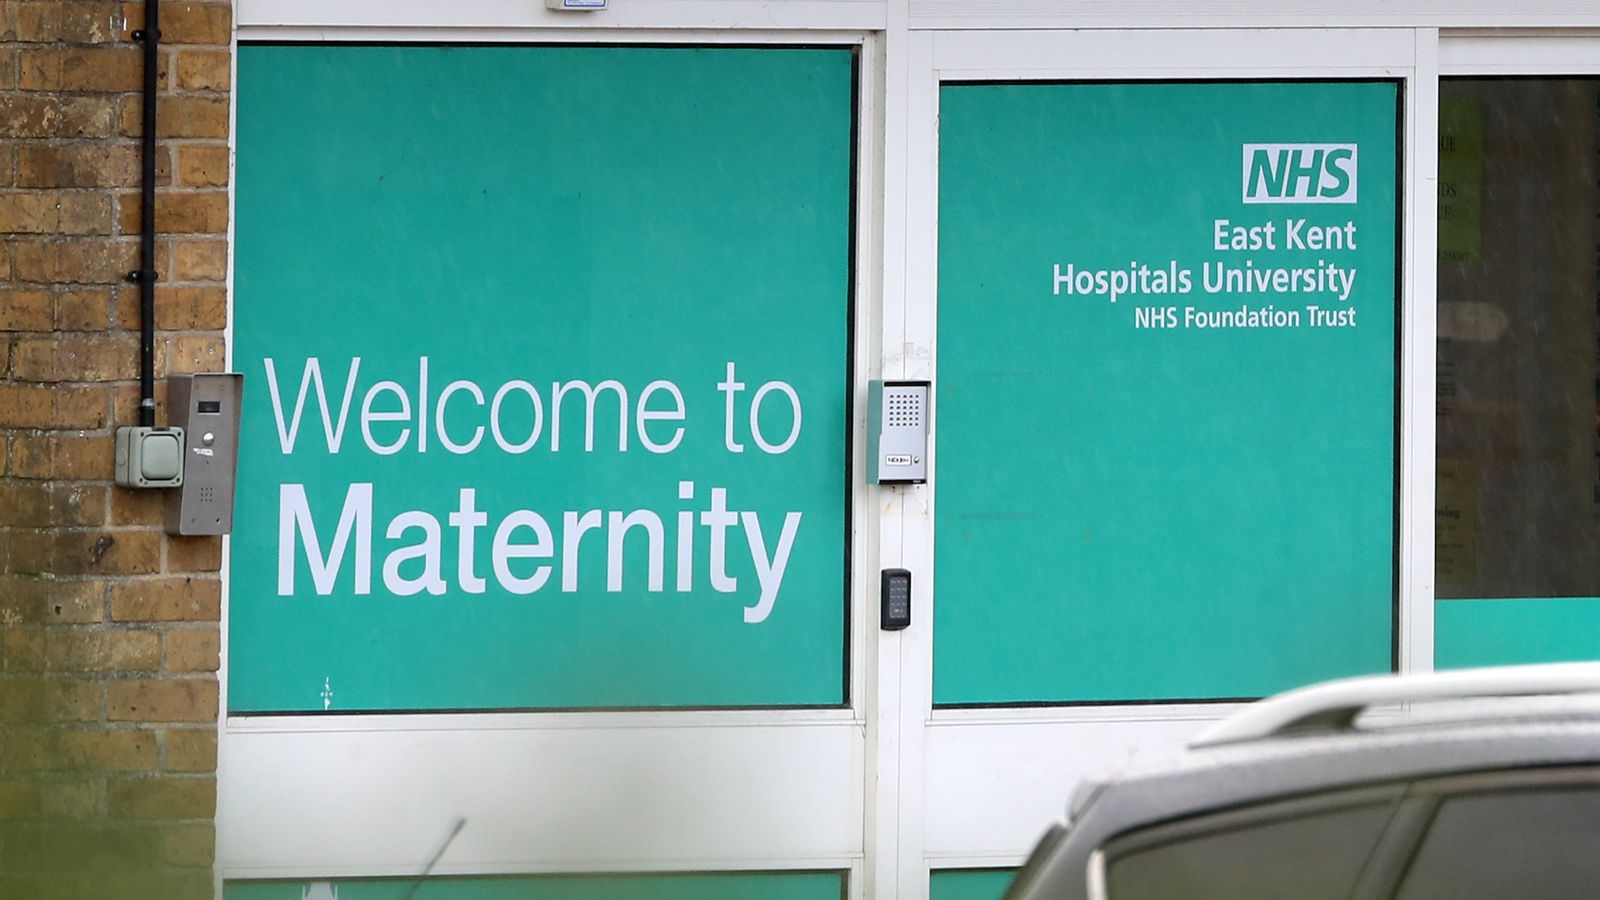 At least 45 baby deaths could have been avoided at two Kent hospitals, report into maternity care at NHS trust finds